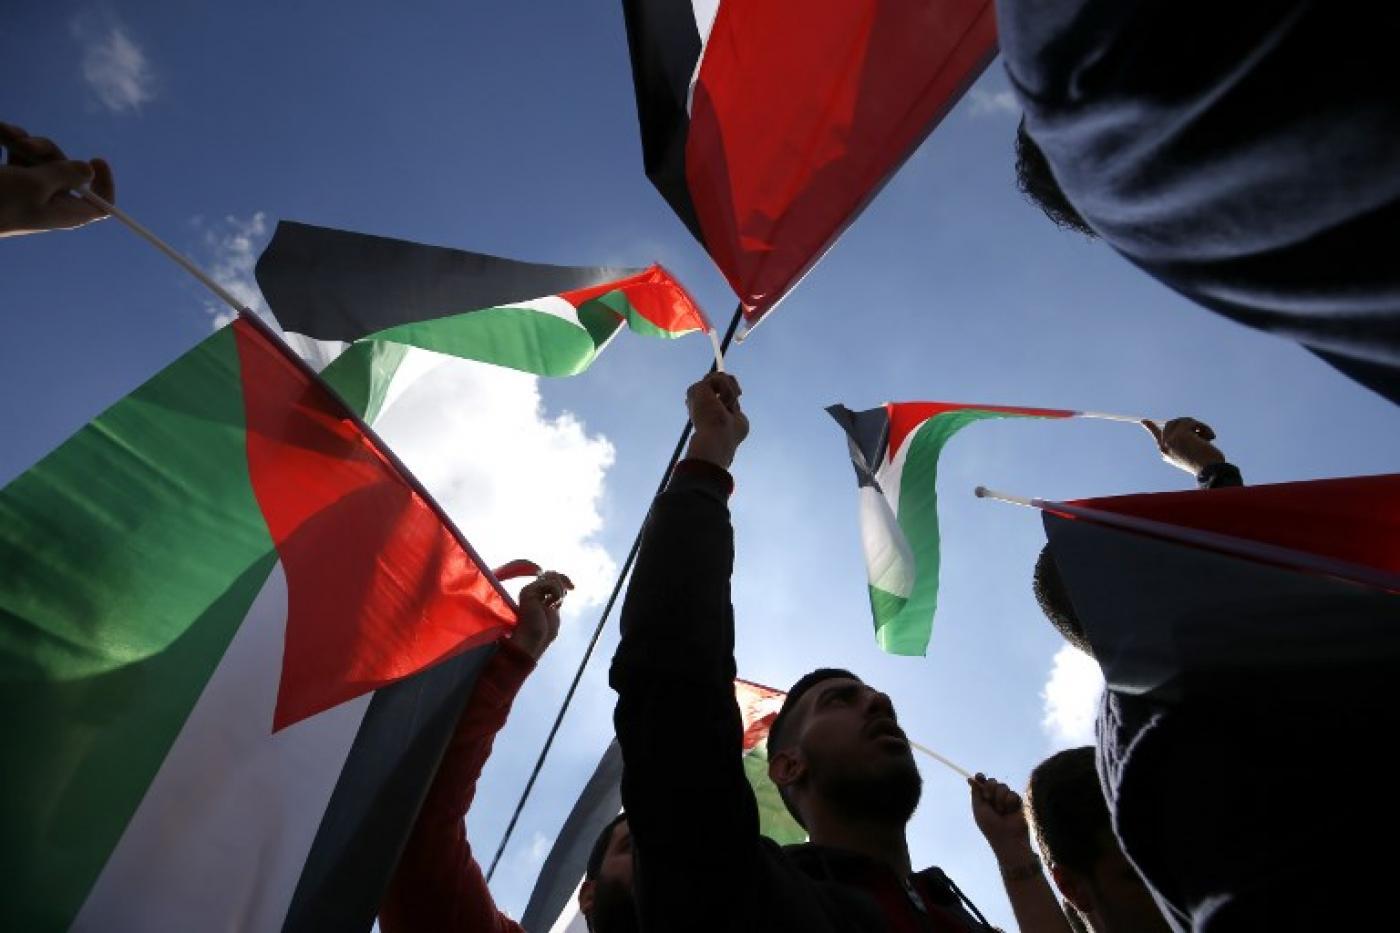 Palestinians hoist their national flag at a protest in Ramallah in November 2018 (AFP)